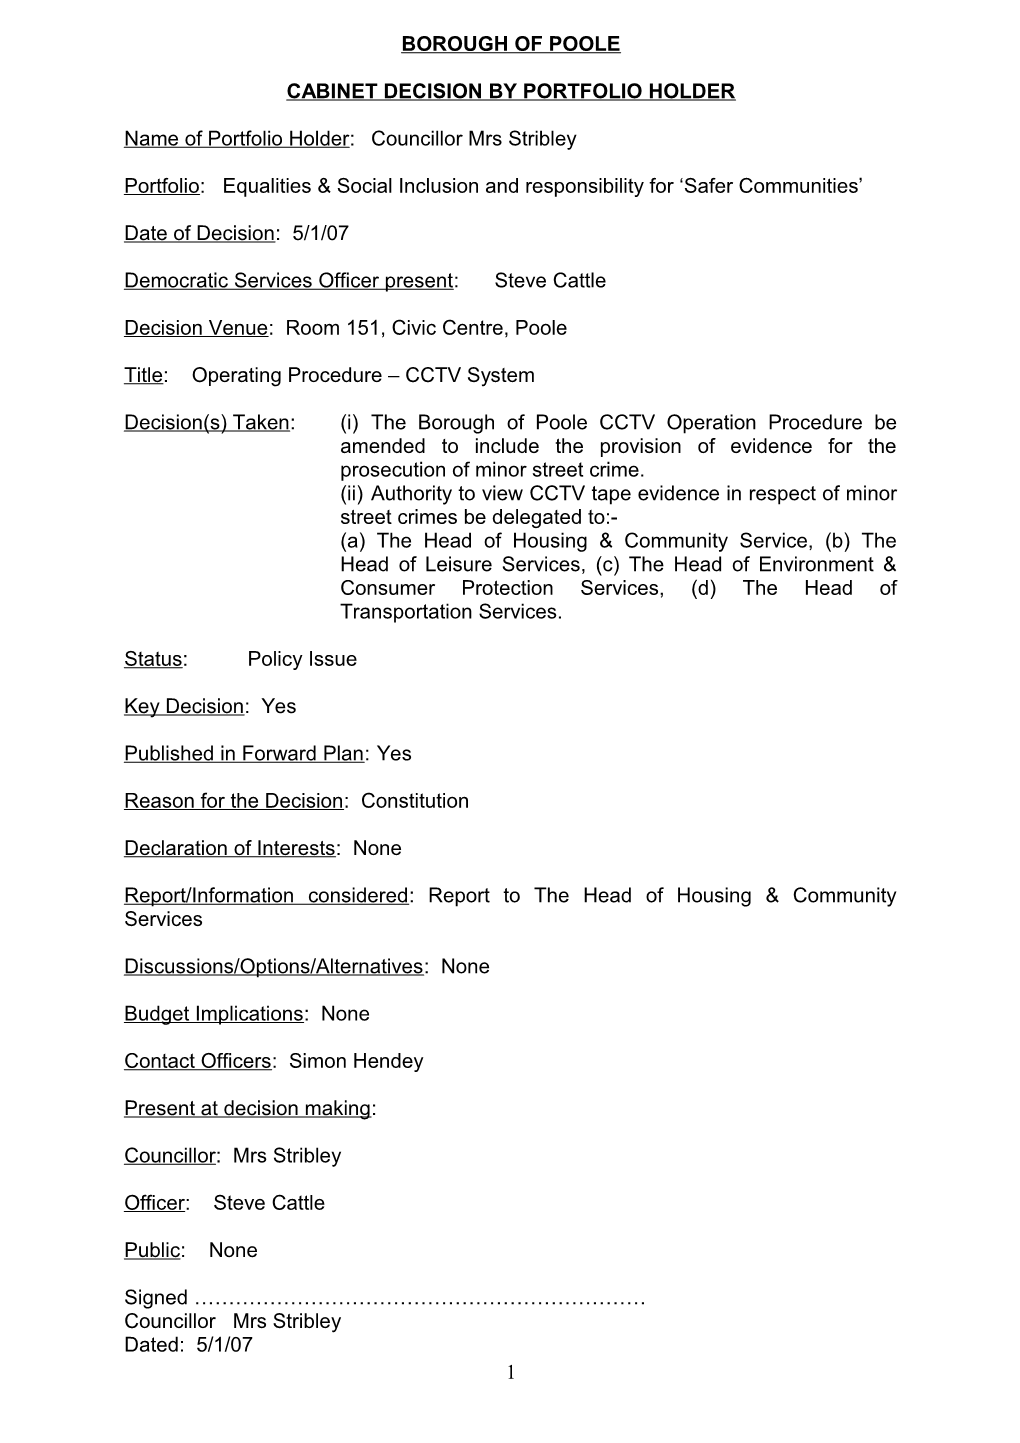 Minutes - Cllr Mrs Stribley - CCTV System - 5 January 2007